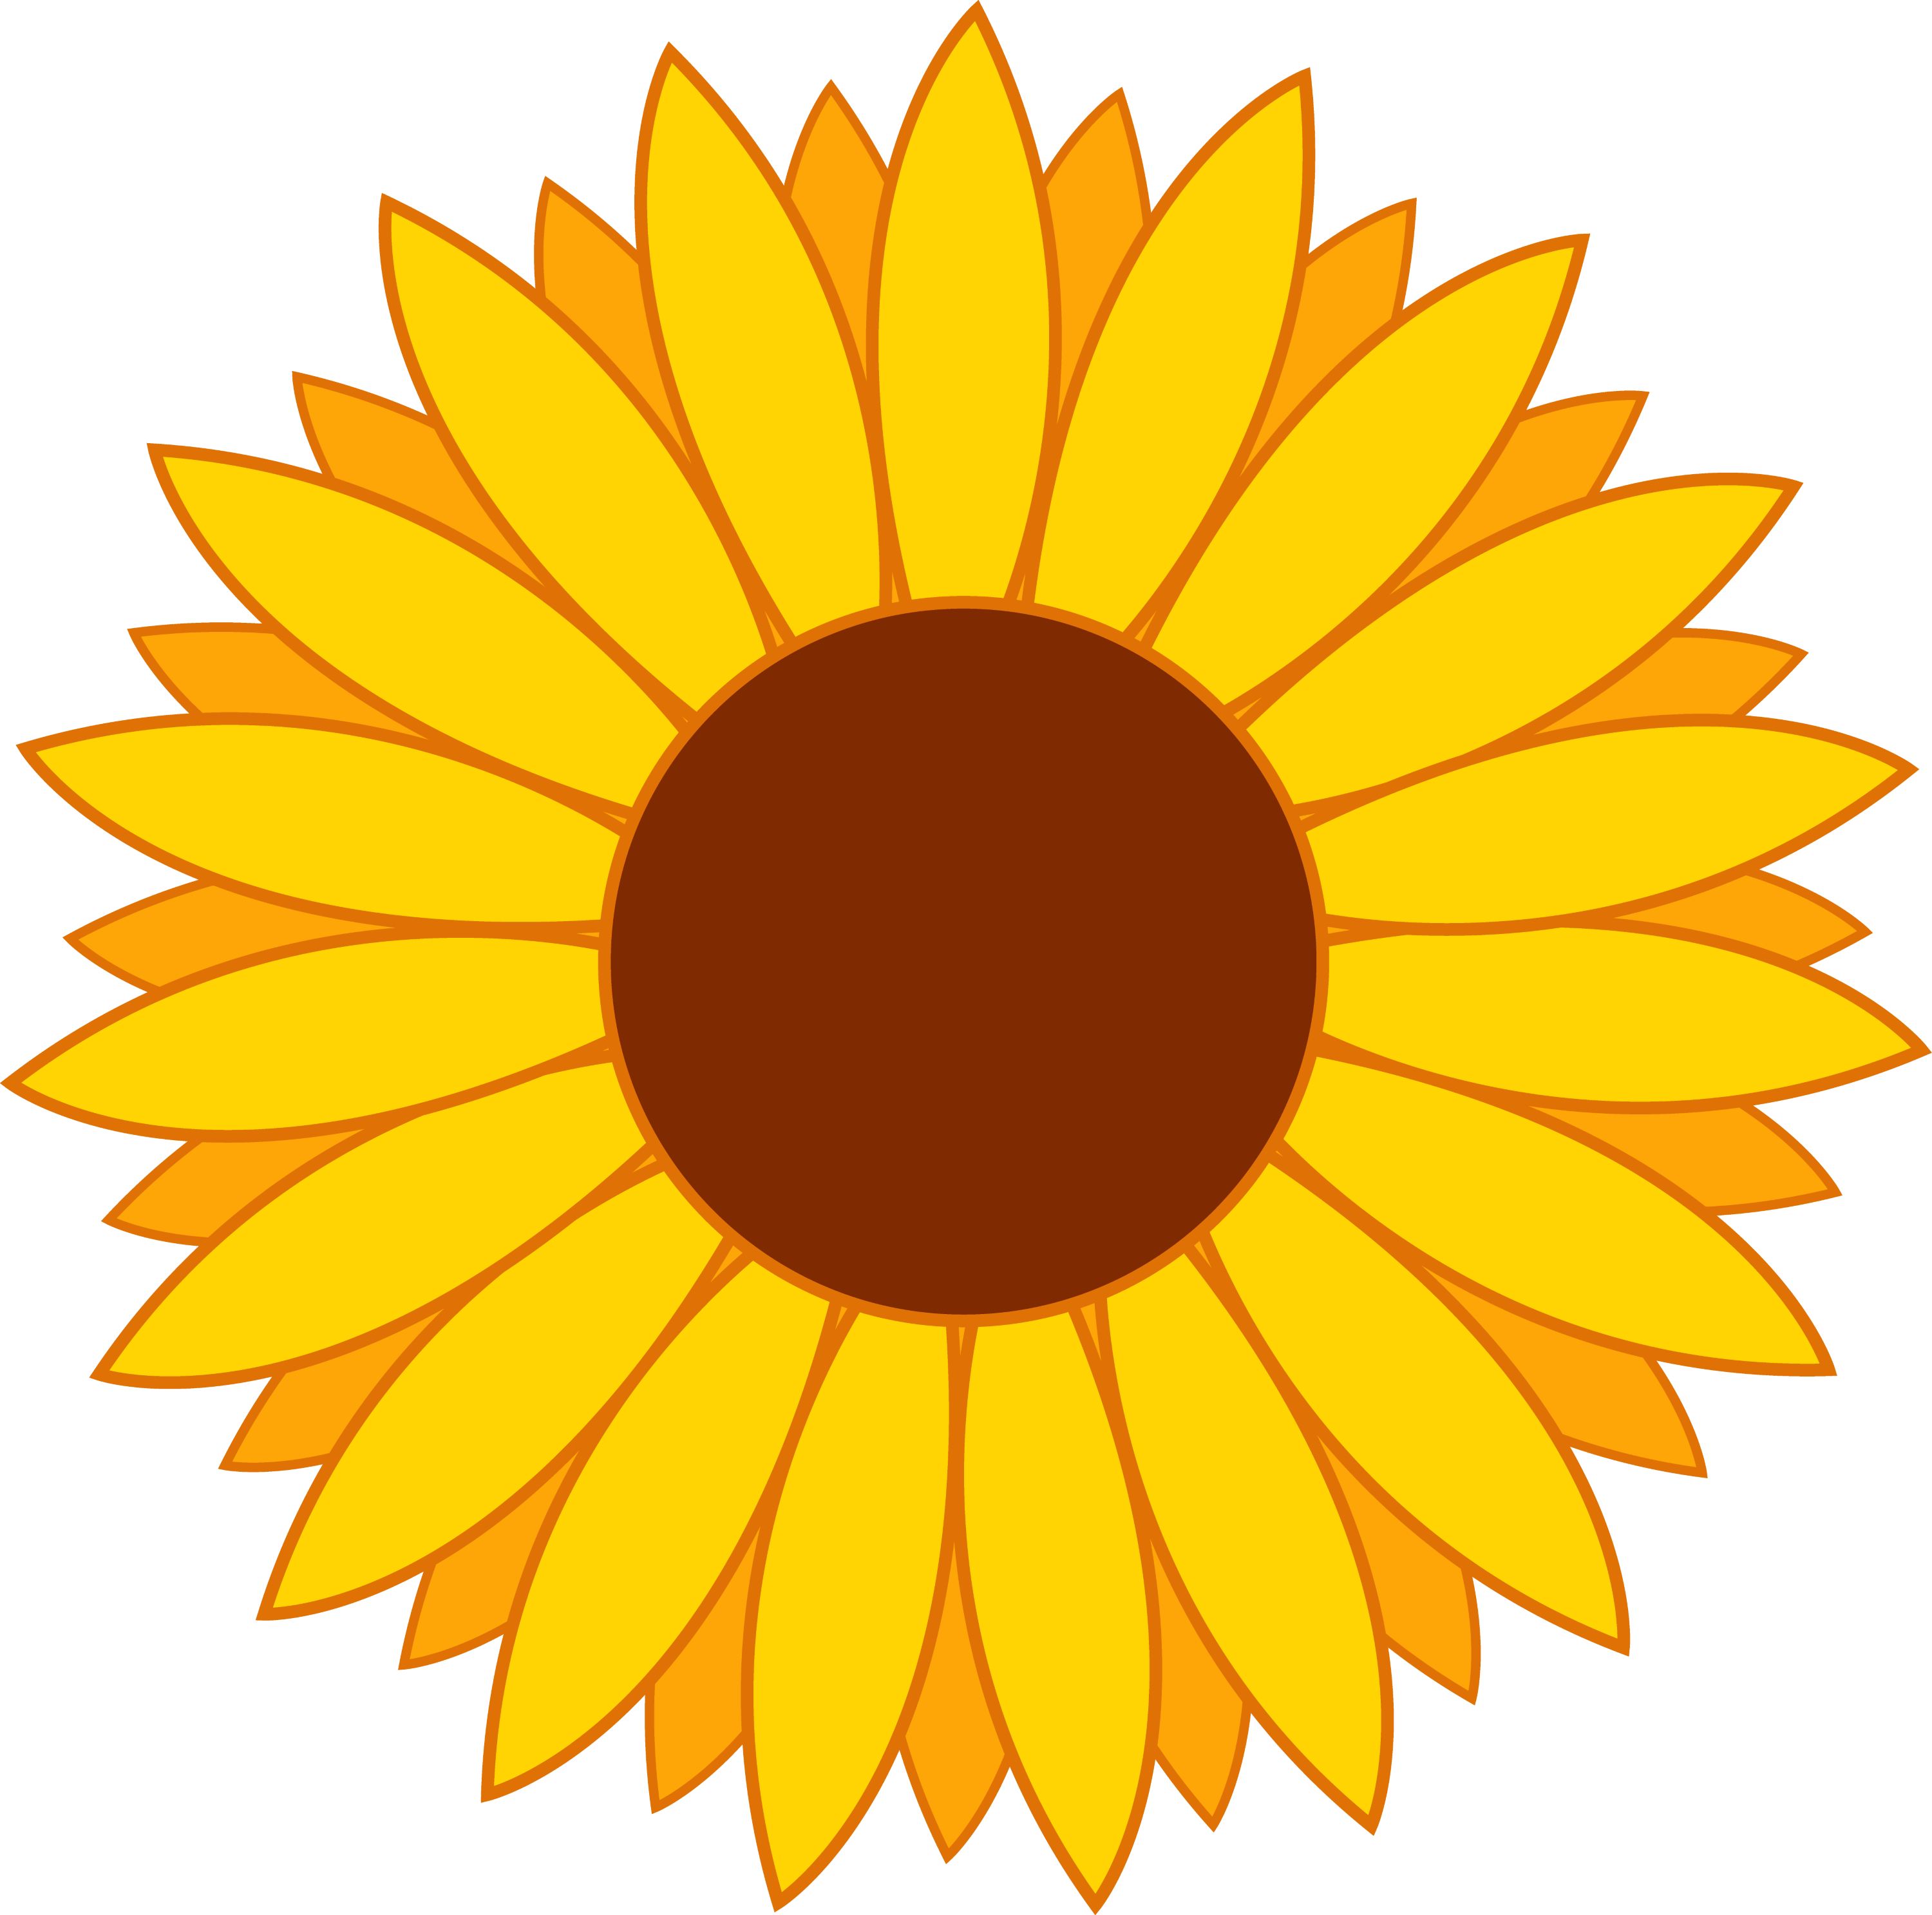 sunflower clipart images - photo #21